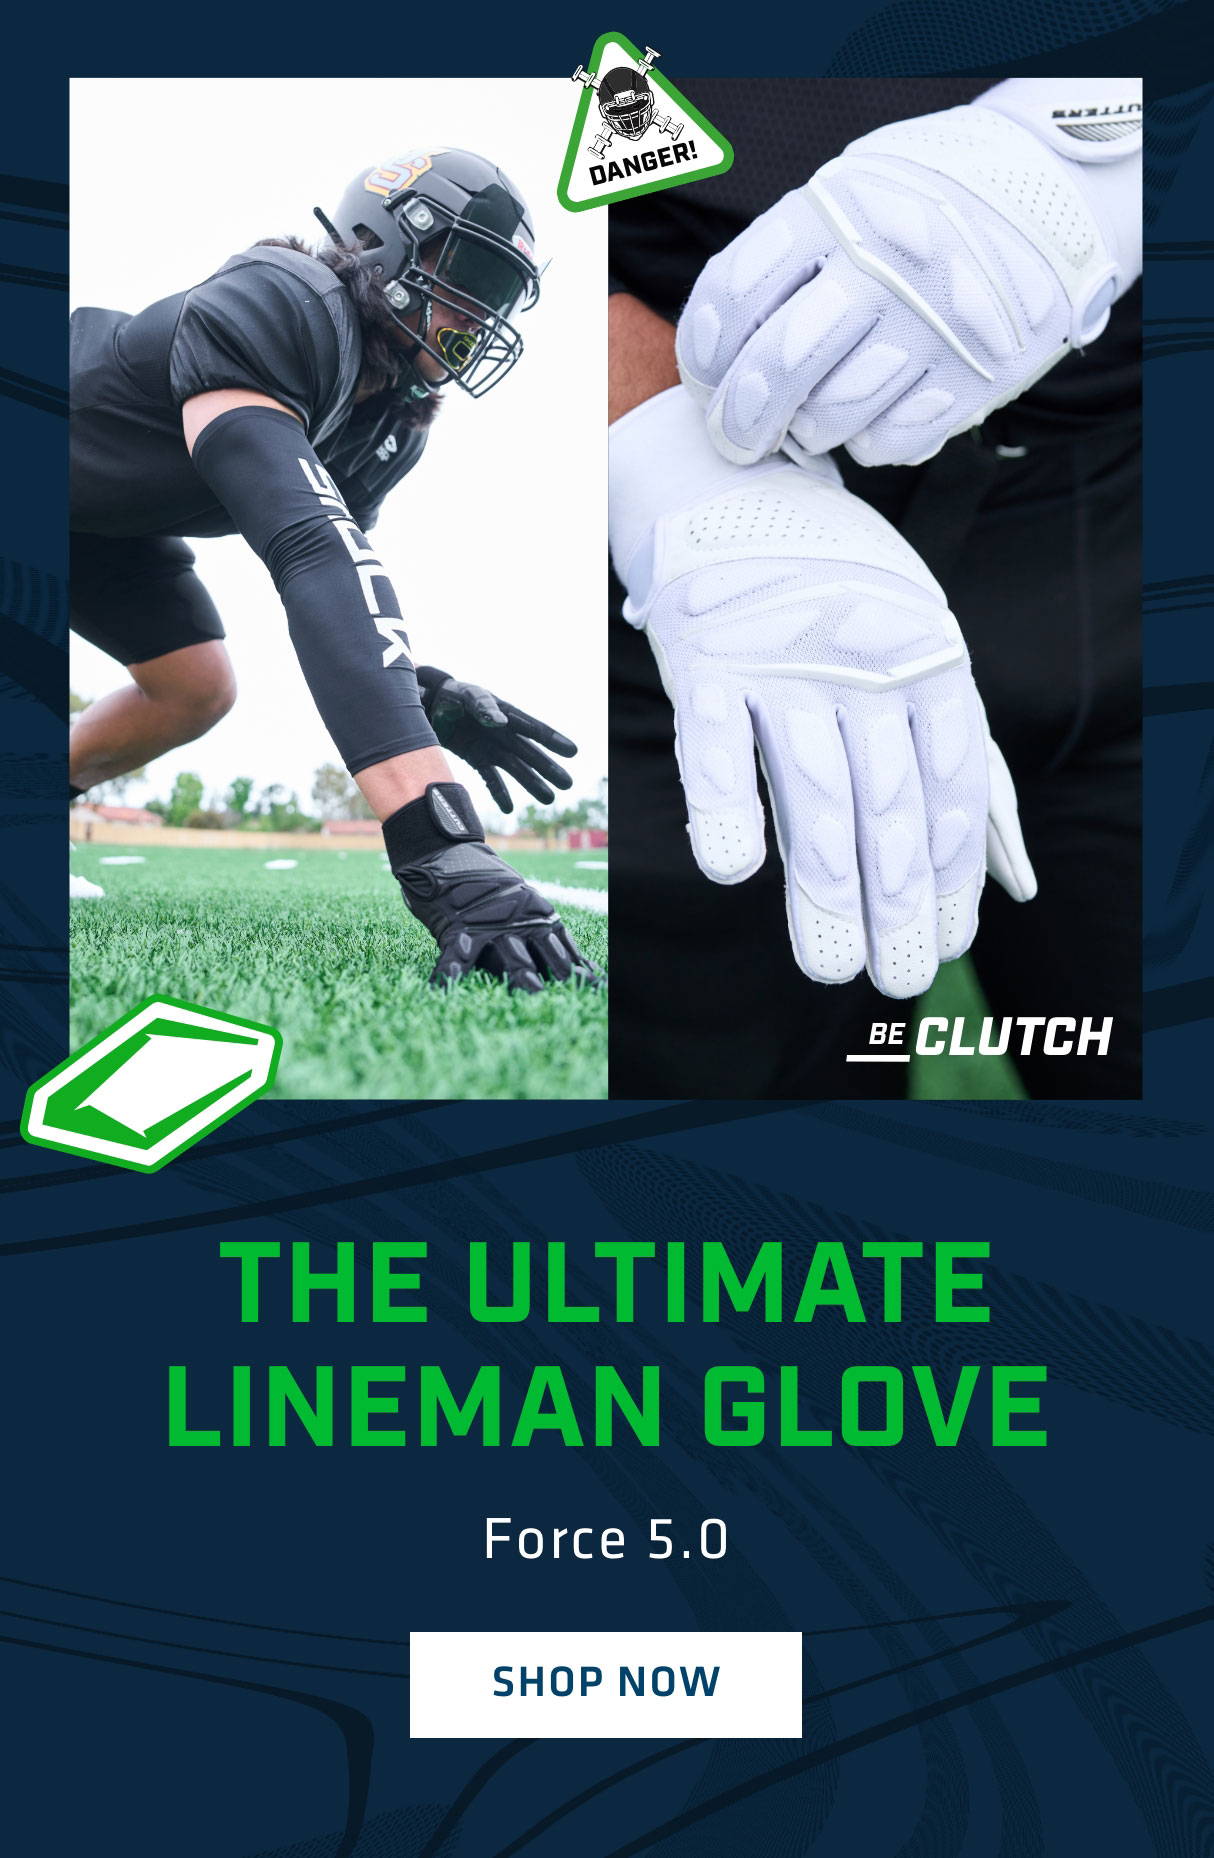 The Ultimate Lineman Glove - Force 5.0 - SHOP NOW